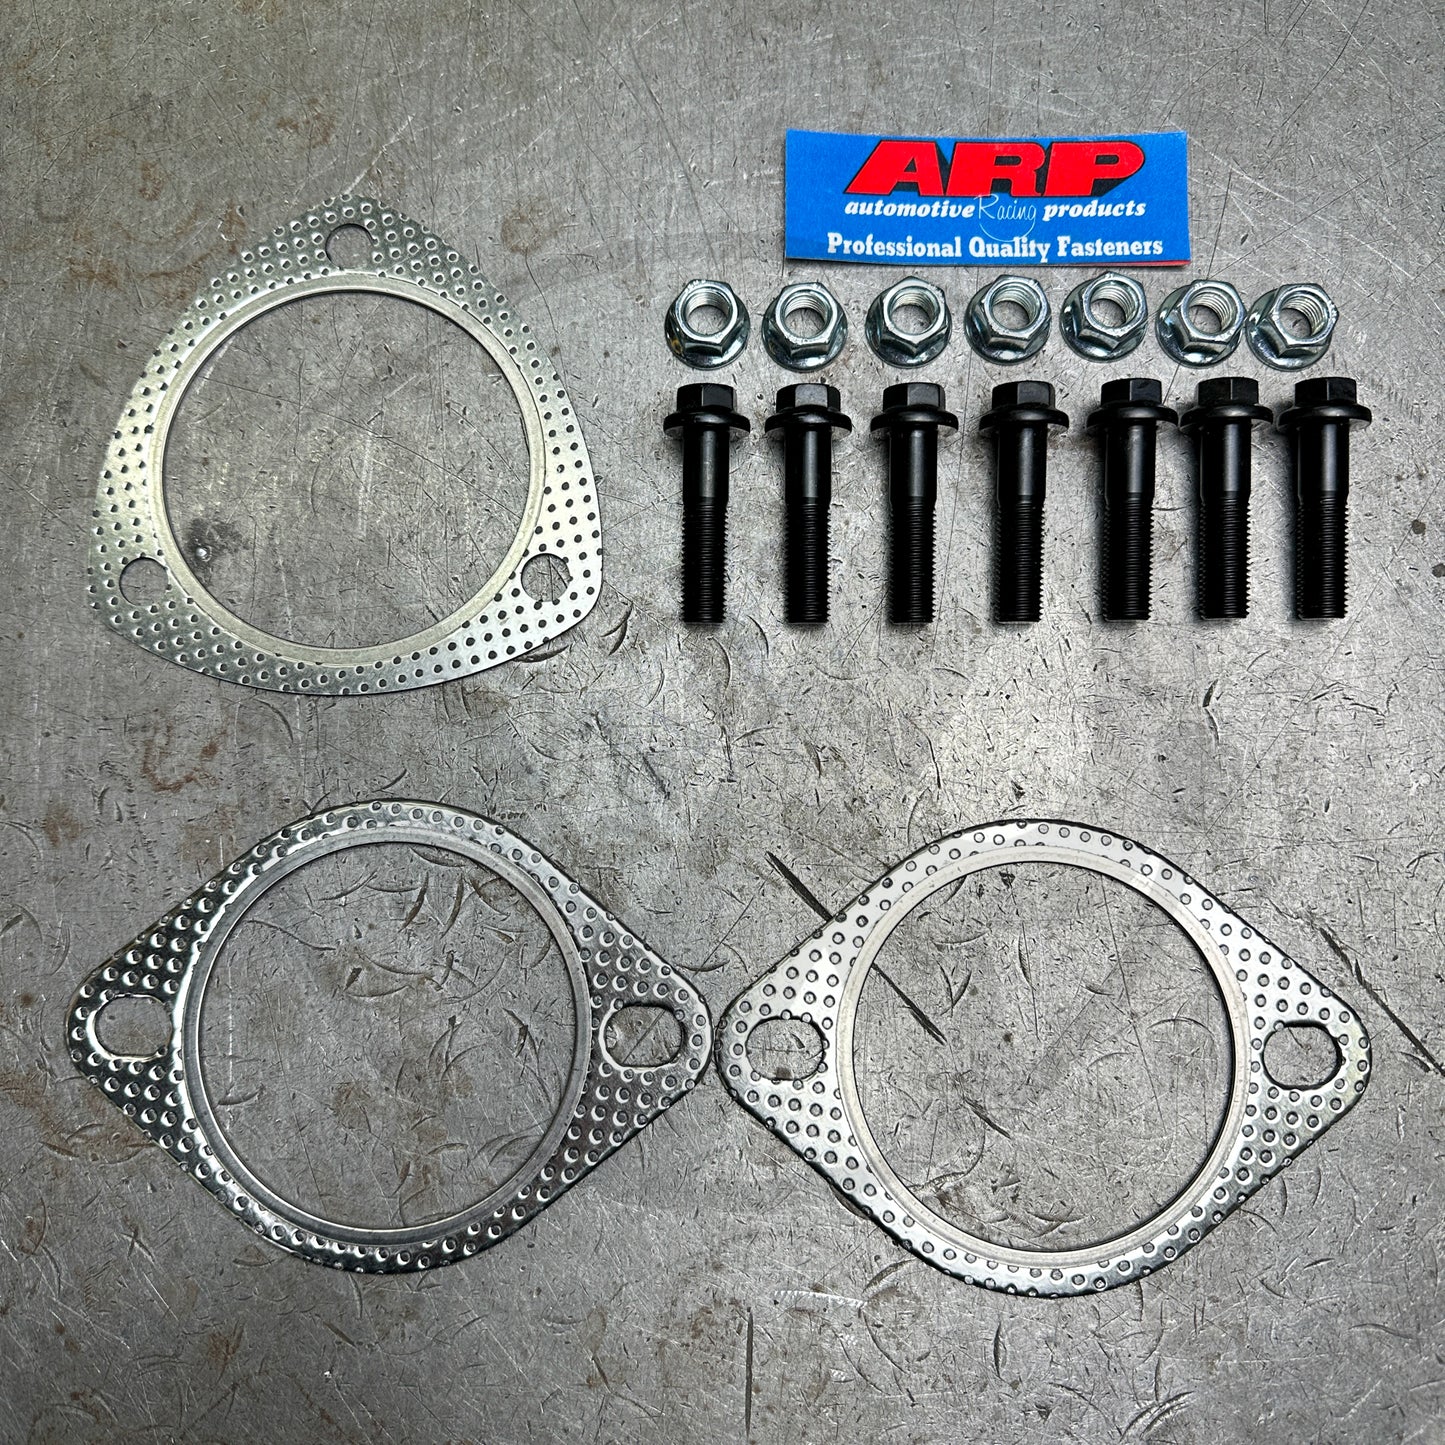 ARP Exhaust Gasket Hardware Kit (3 inch) For Honda Civic Acura Integra (Stainless Nuts)